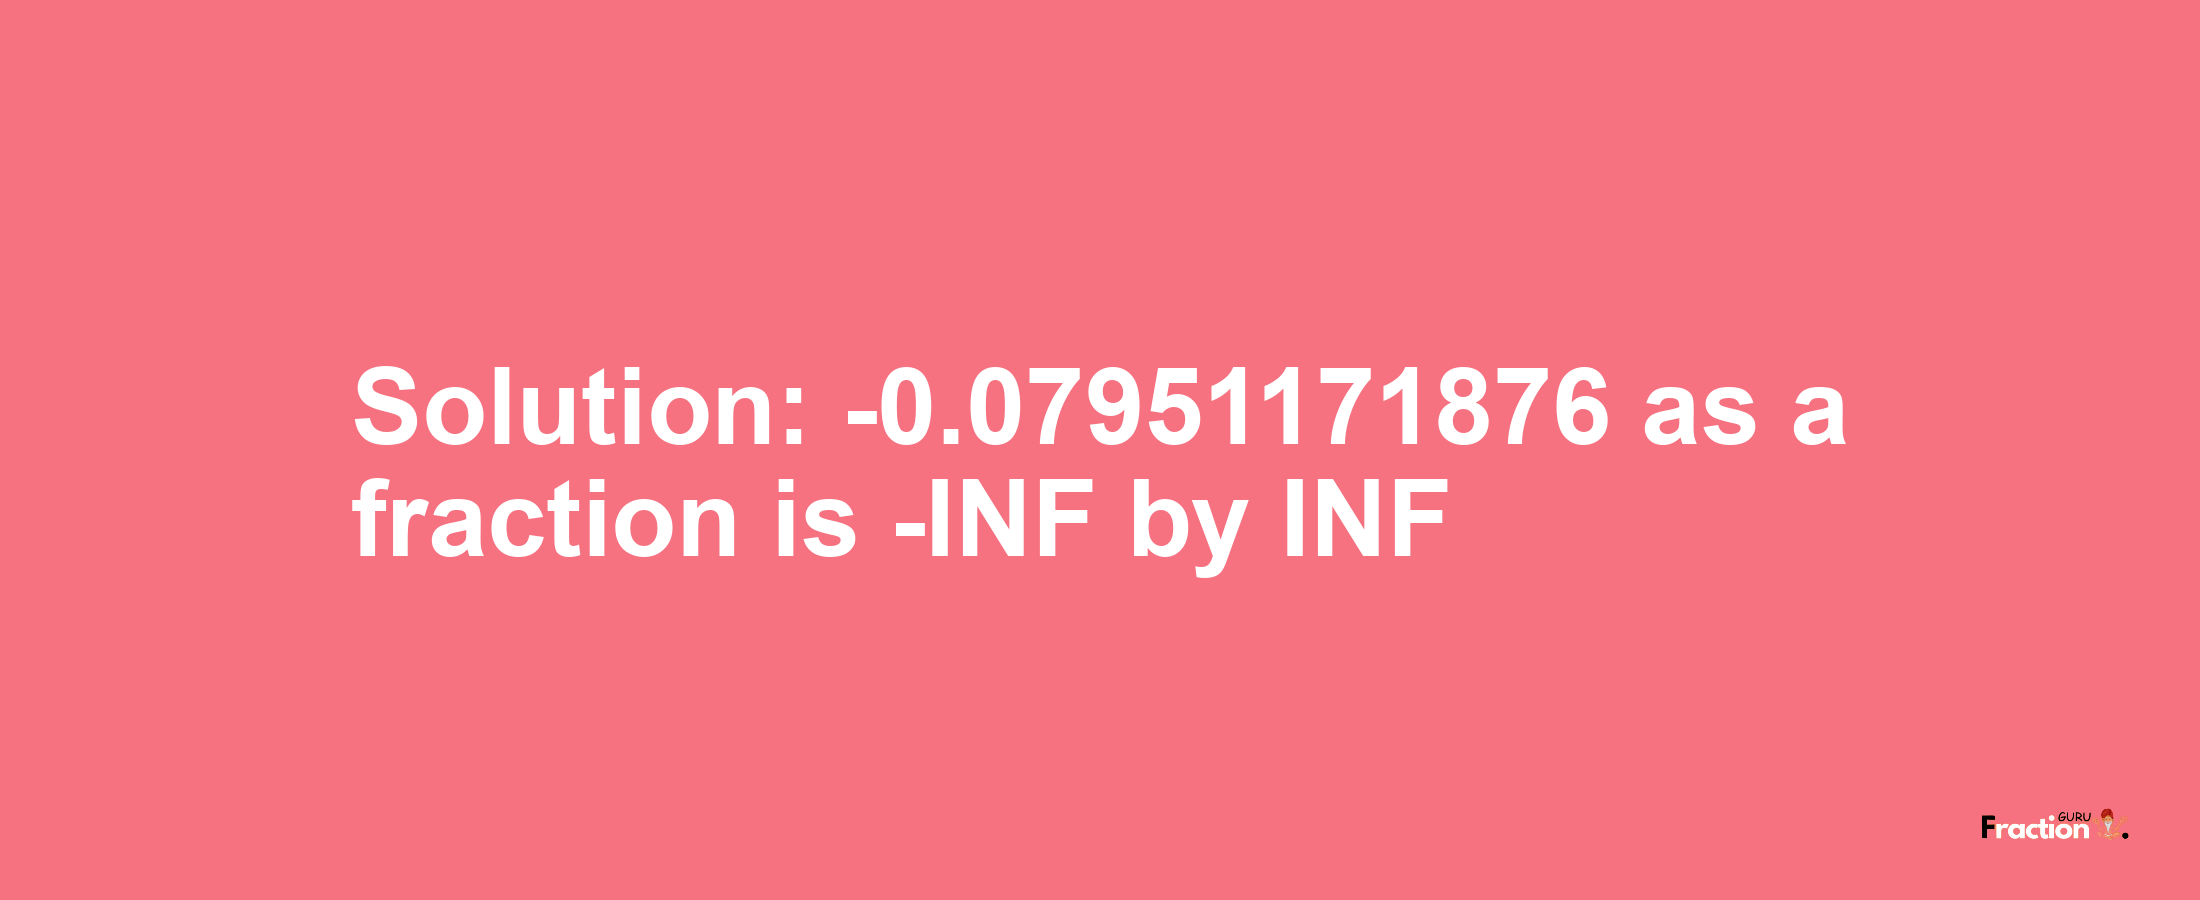 Solution:-0.07951171876 as a fraction is -INF/INF